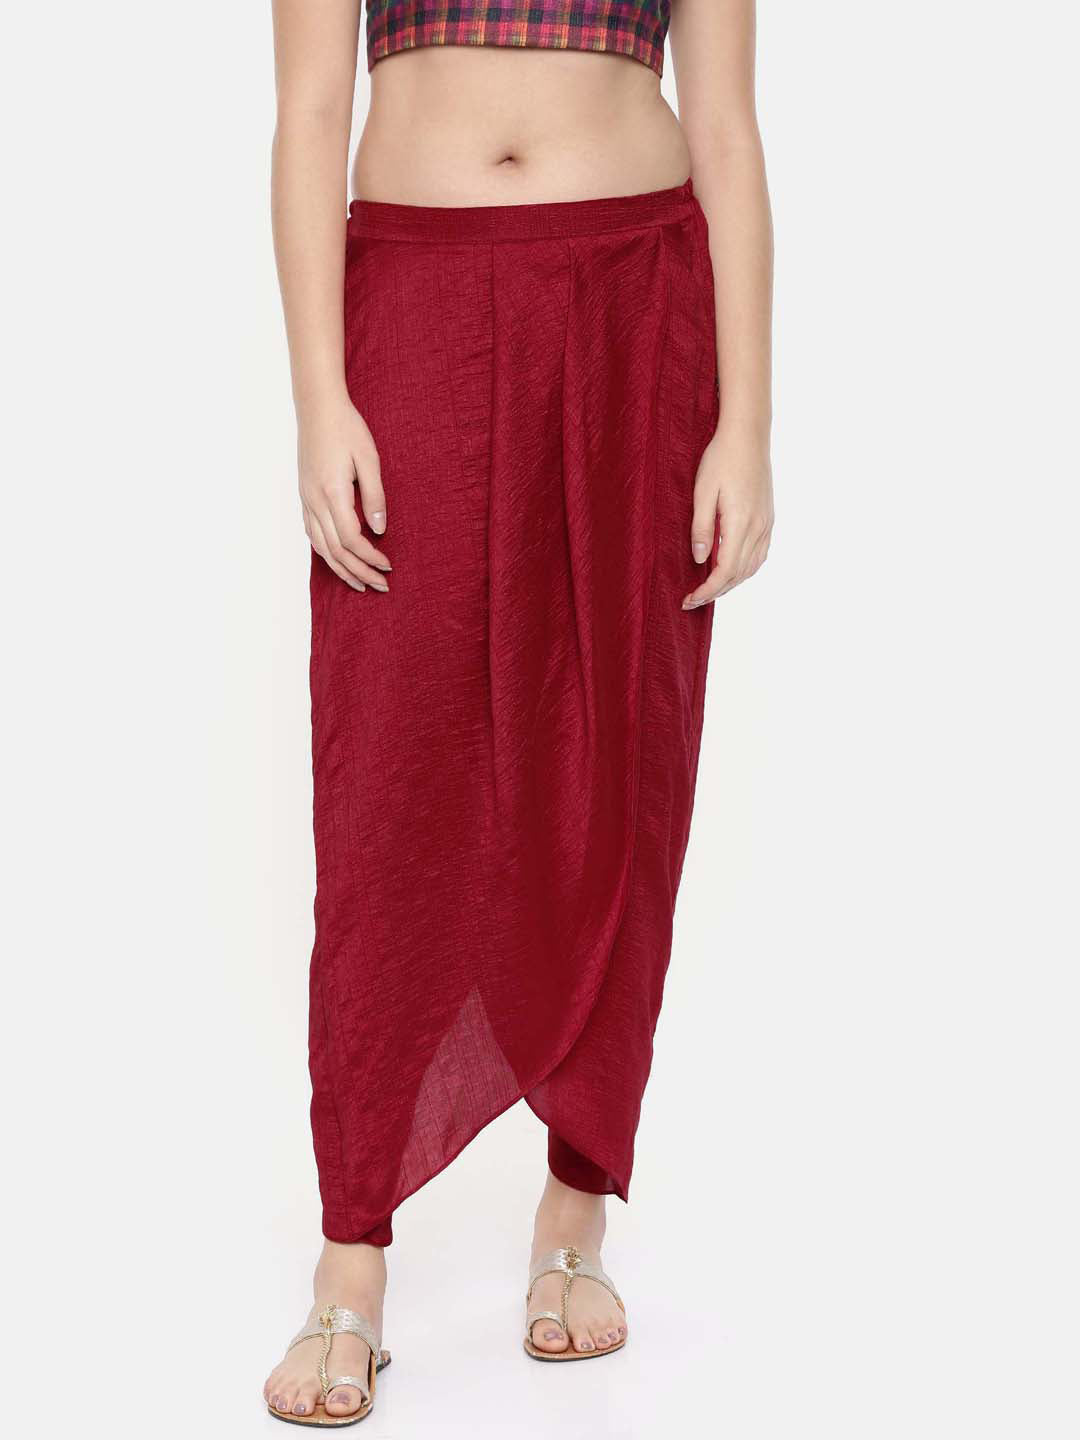 FAIABLE Velvet Pants for Women Wide Leg Pants High Waisted Palazzo Pants  Causal Outfits Baggy Flowy Y2K Pants with Pockets Brown at Amazon Women's  Clothing store